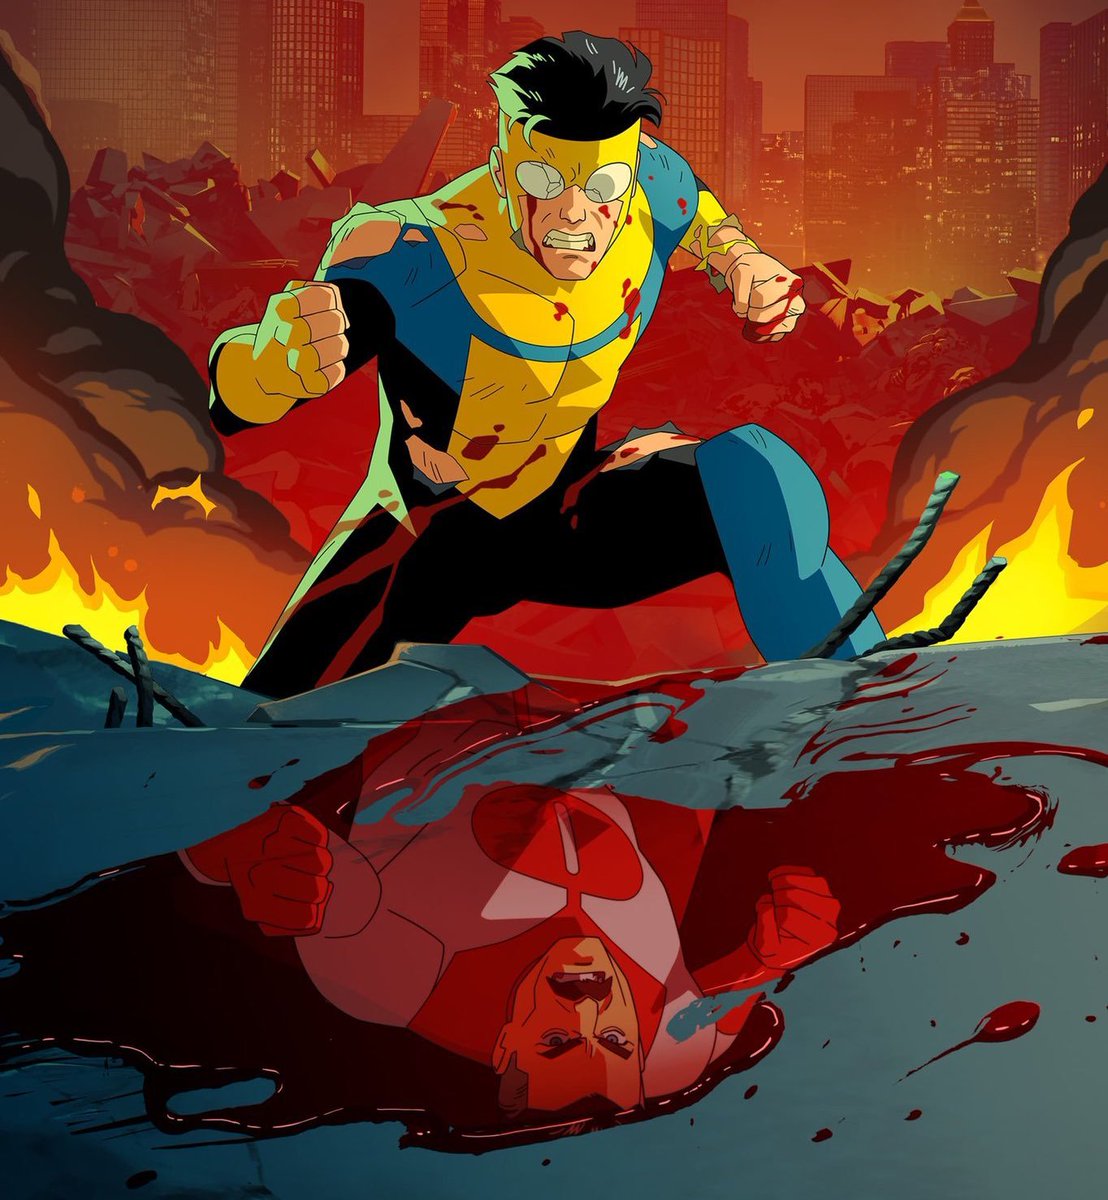 Voice work for #Invincible S3 is already complete